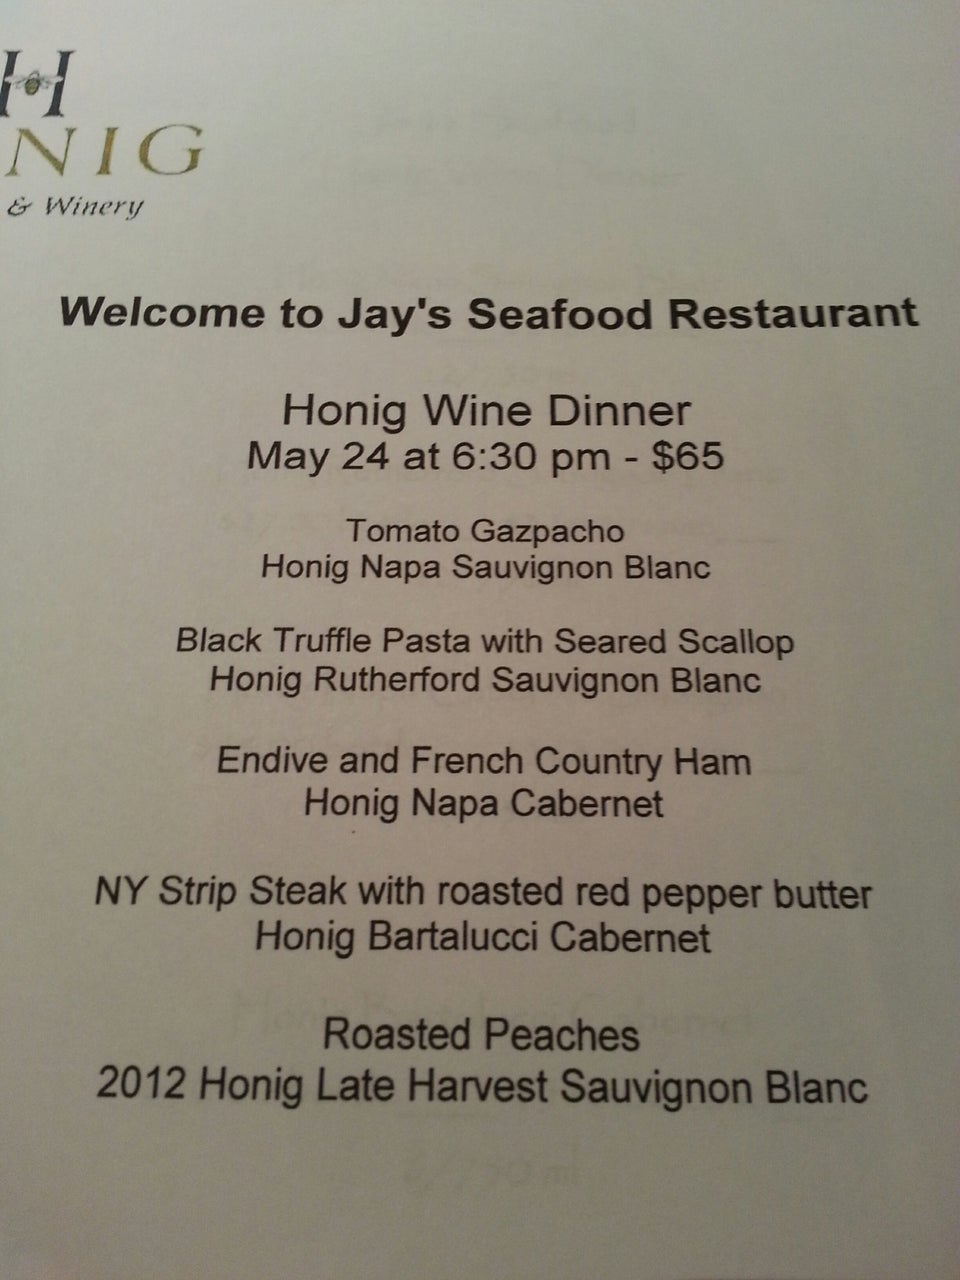 Photo of Jay's Seafood Restaurant